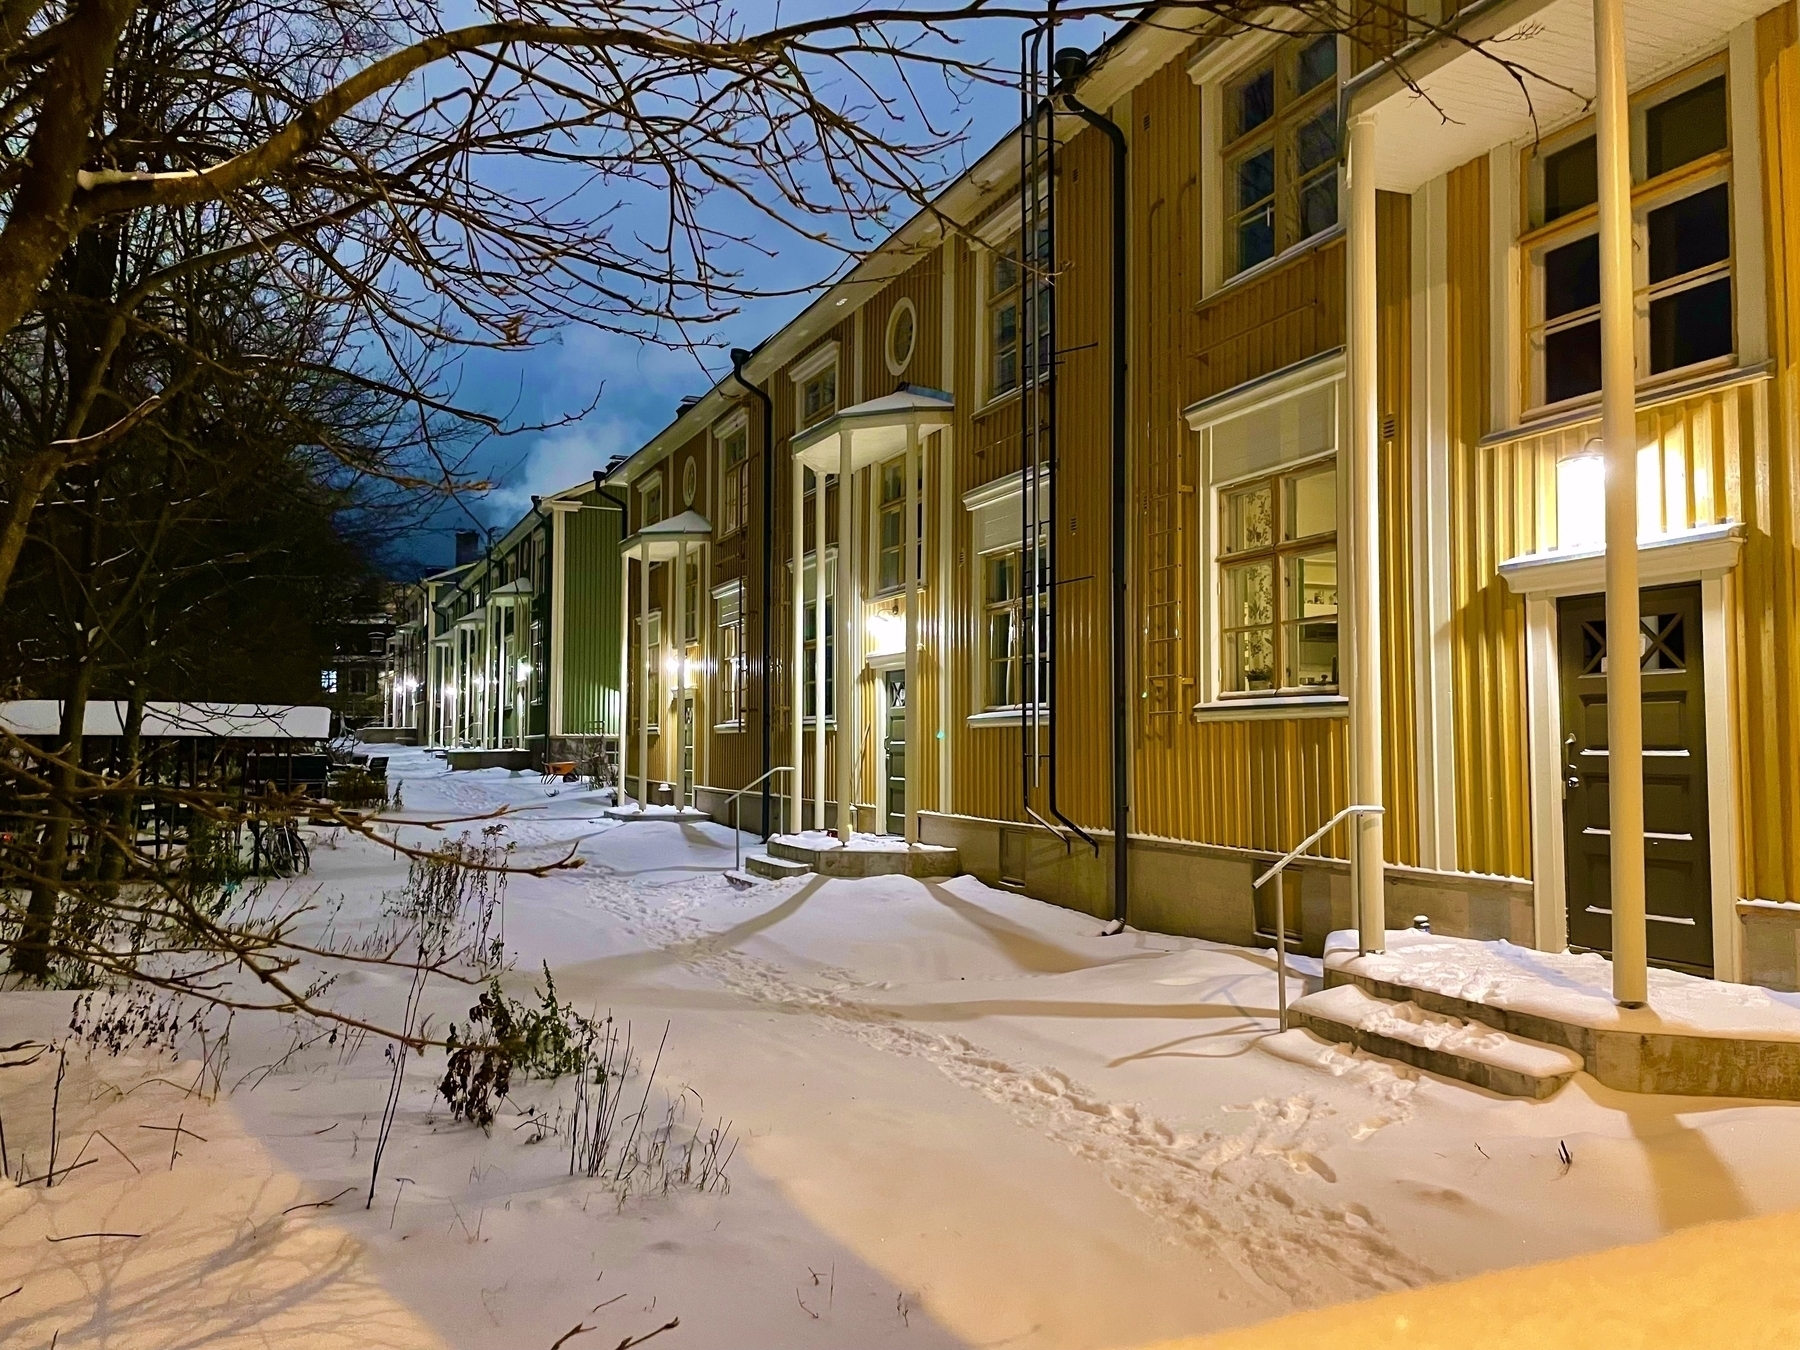 A row of houses in Vallila, Helsinki, with entrances with big pillars, evening photo with snow on the ground